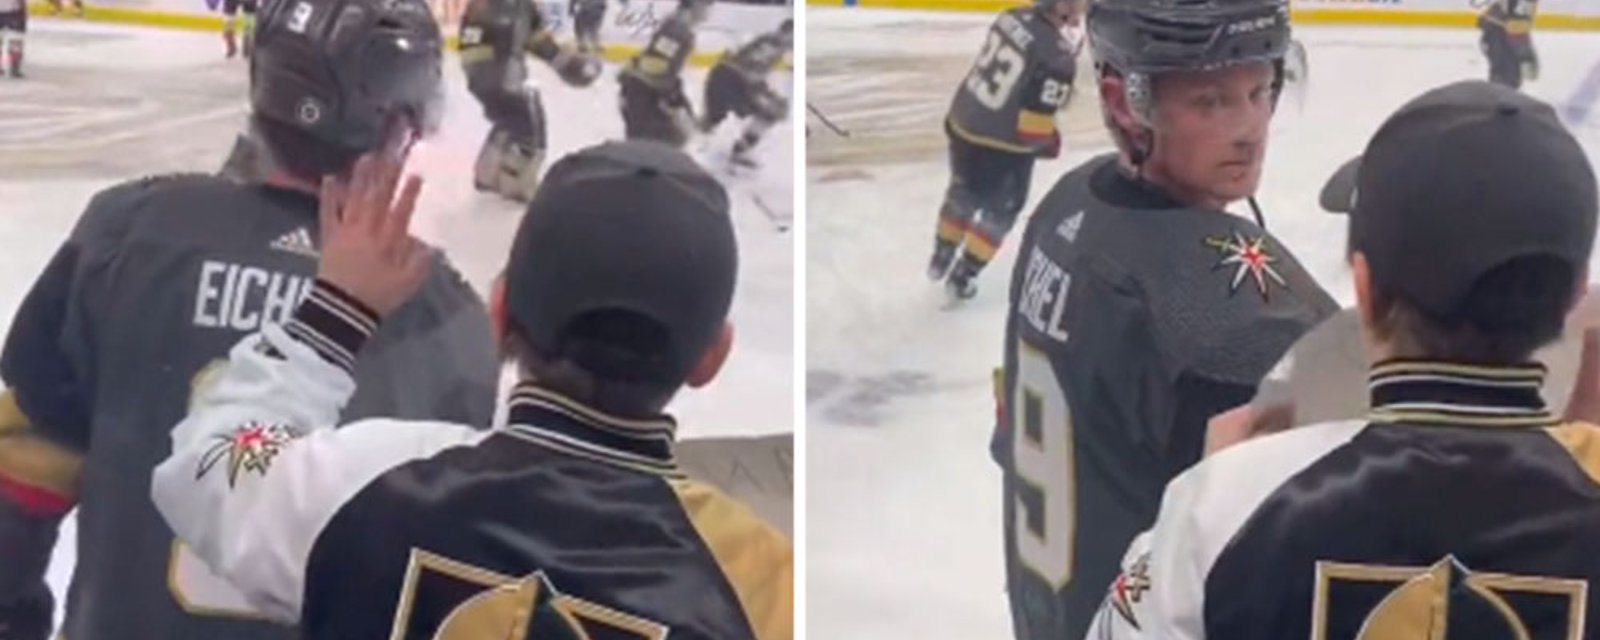 Eichel goes viral for ignoring young fan during pre-game